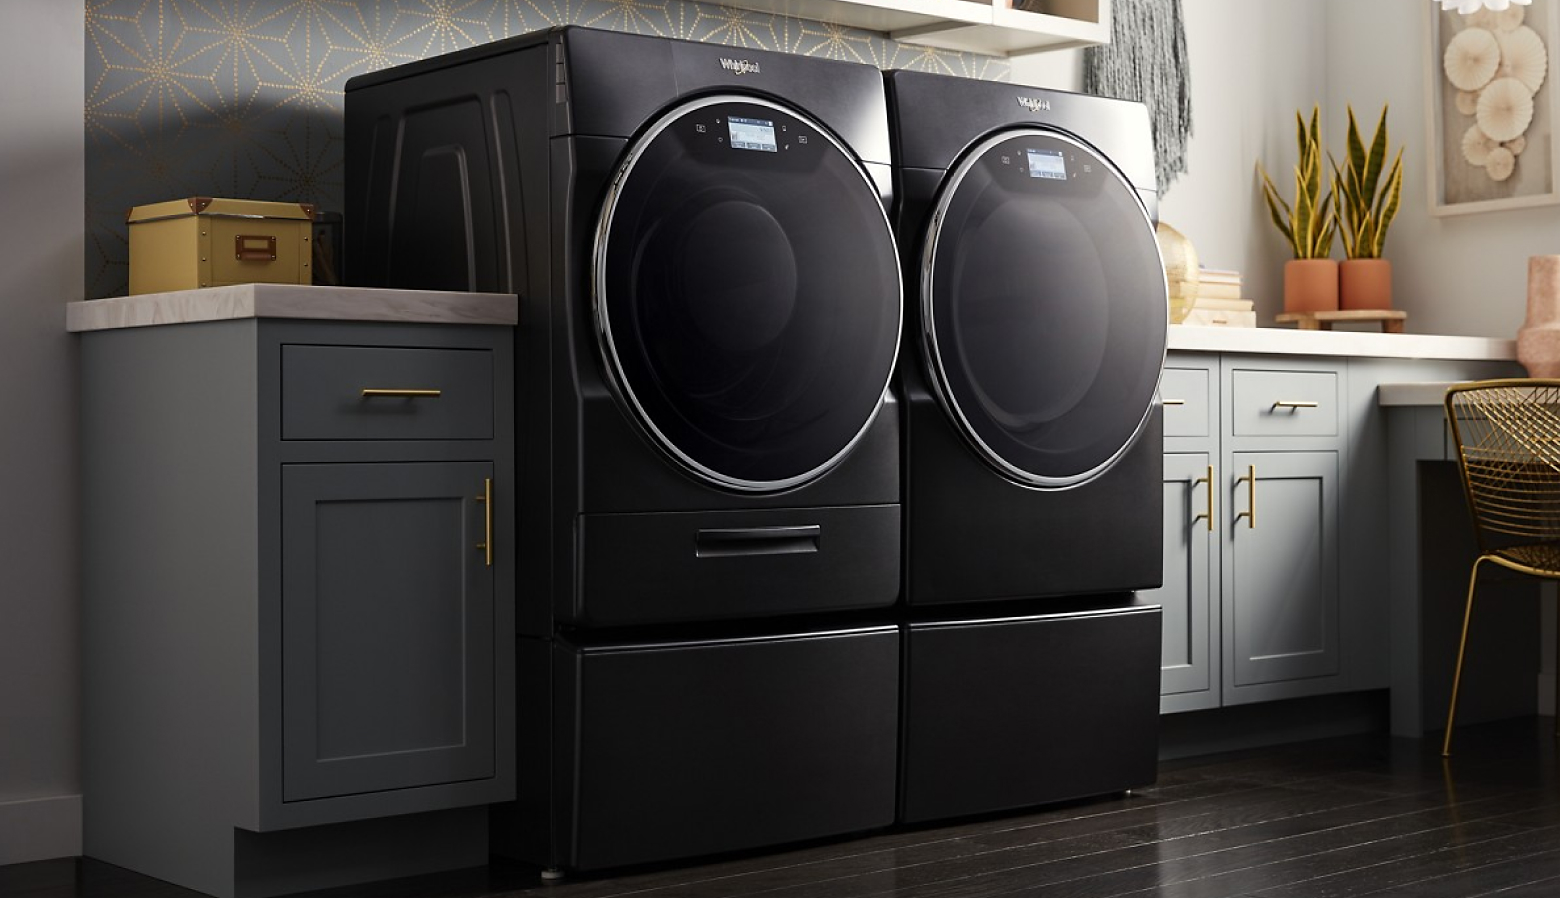 Gas vs. Electric Dryers: What's the Difference?